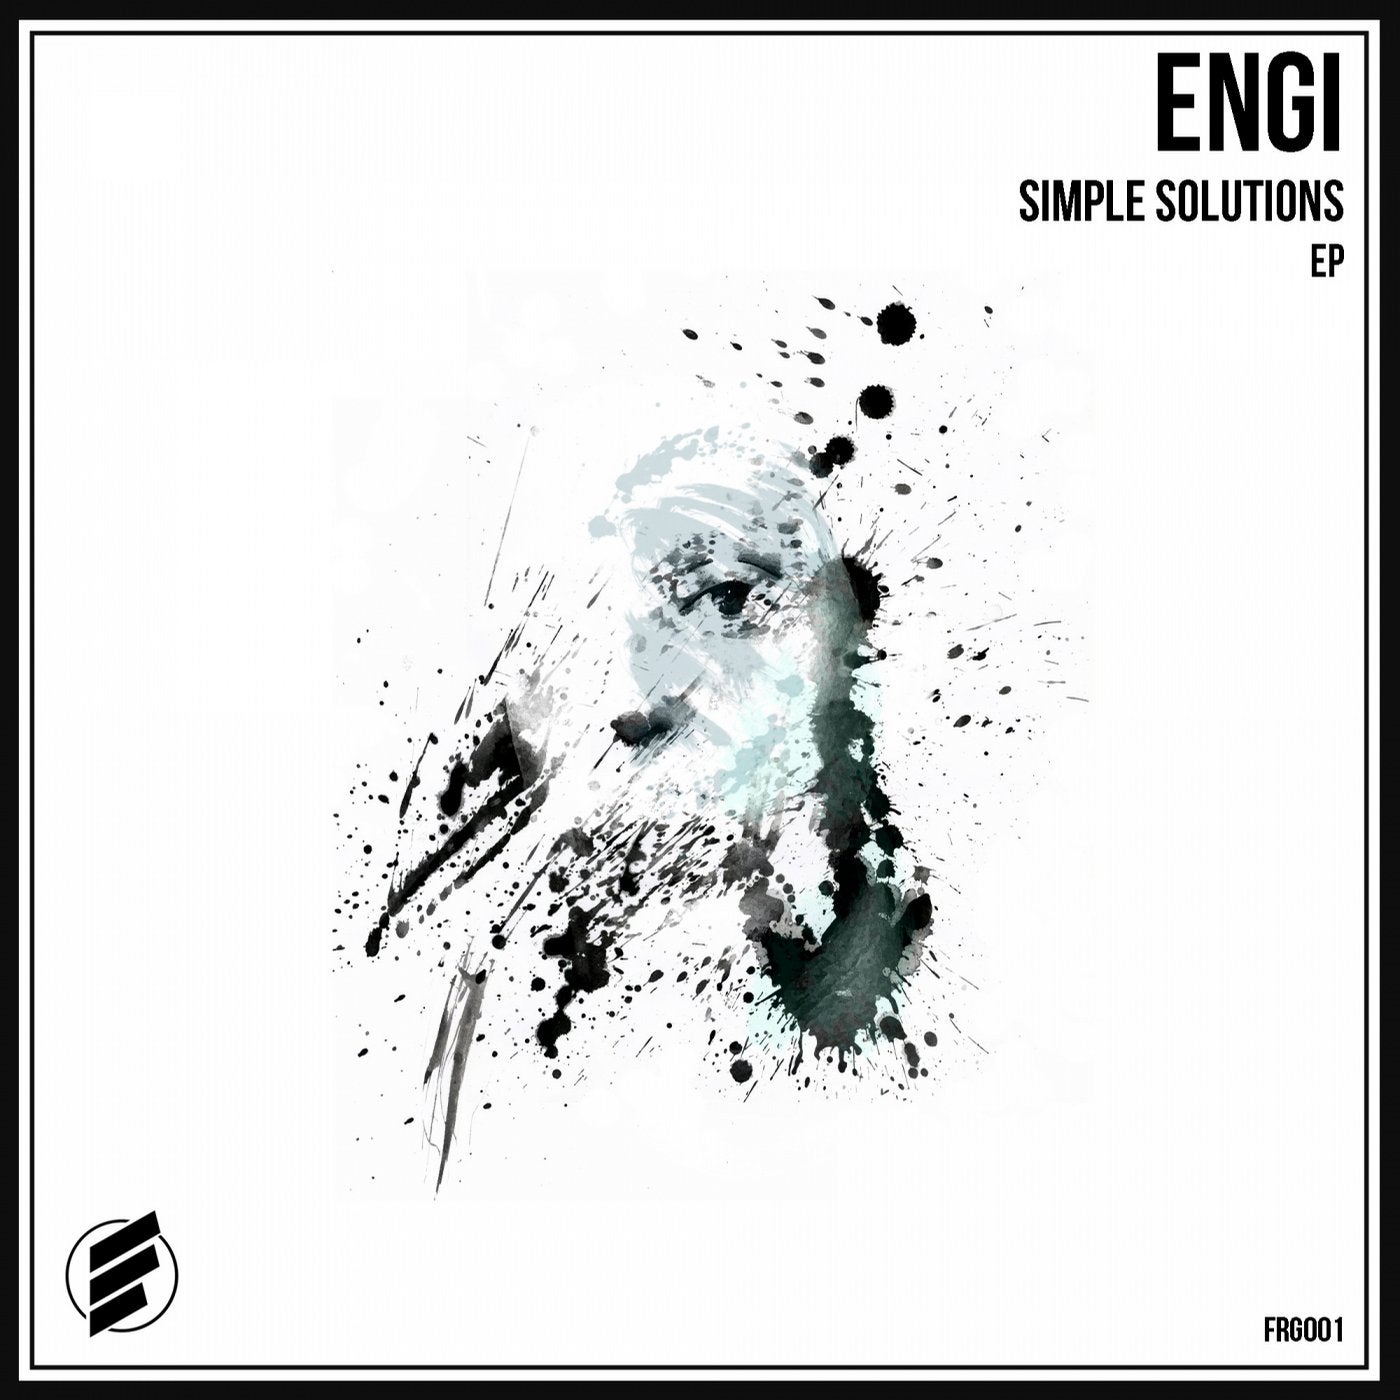 Simple Solutions EP